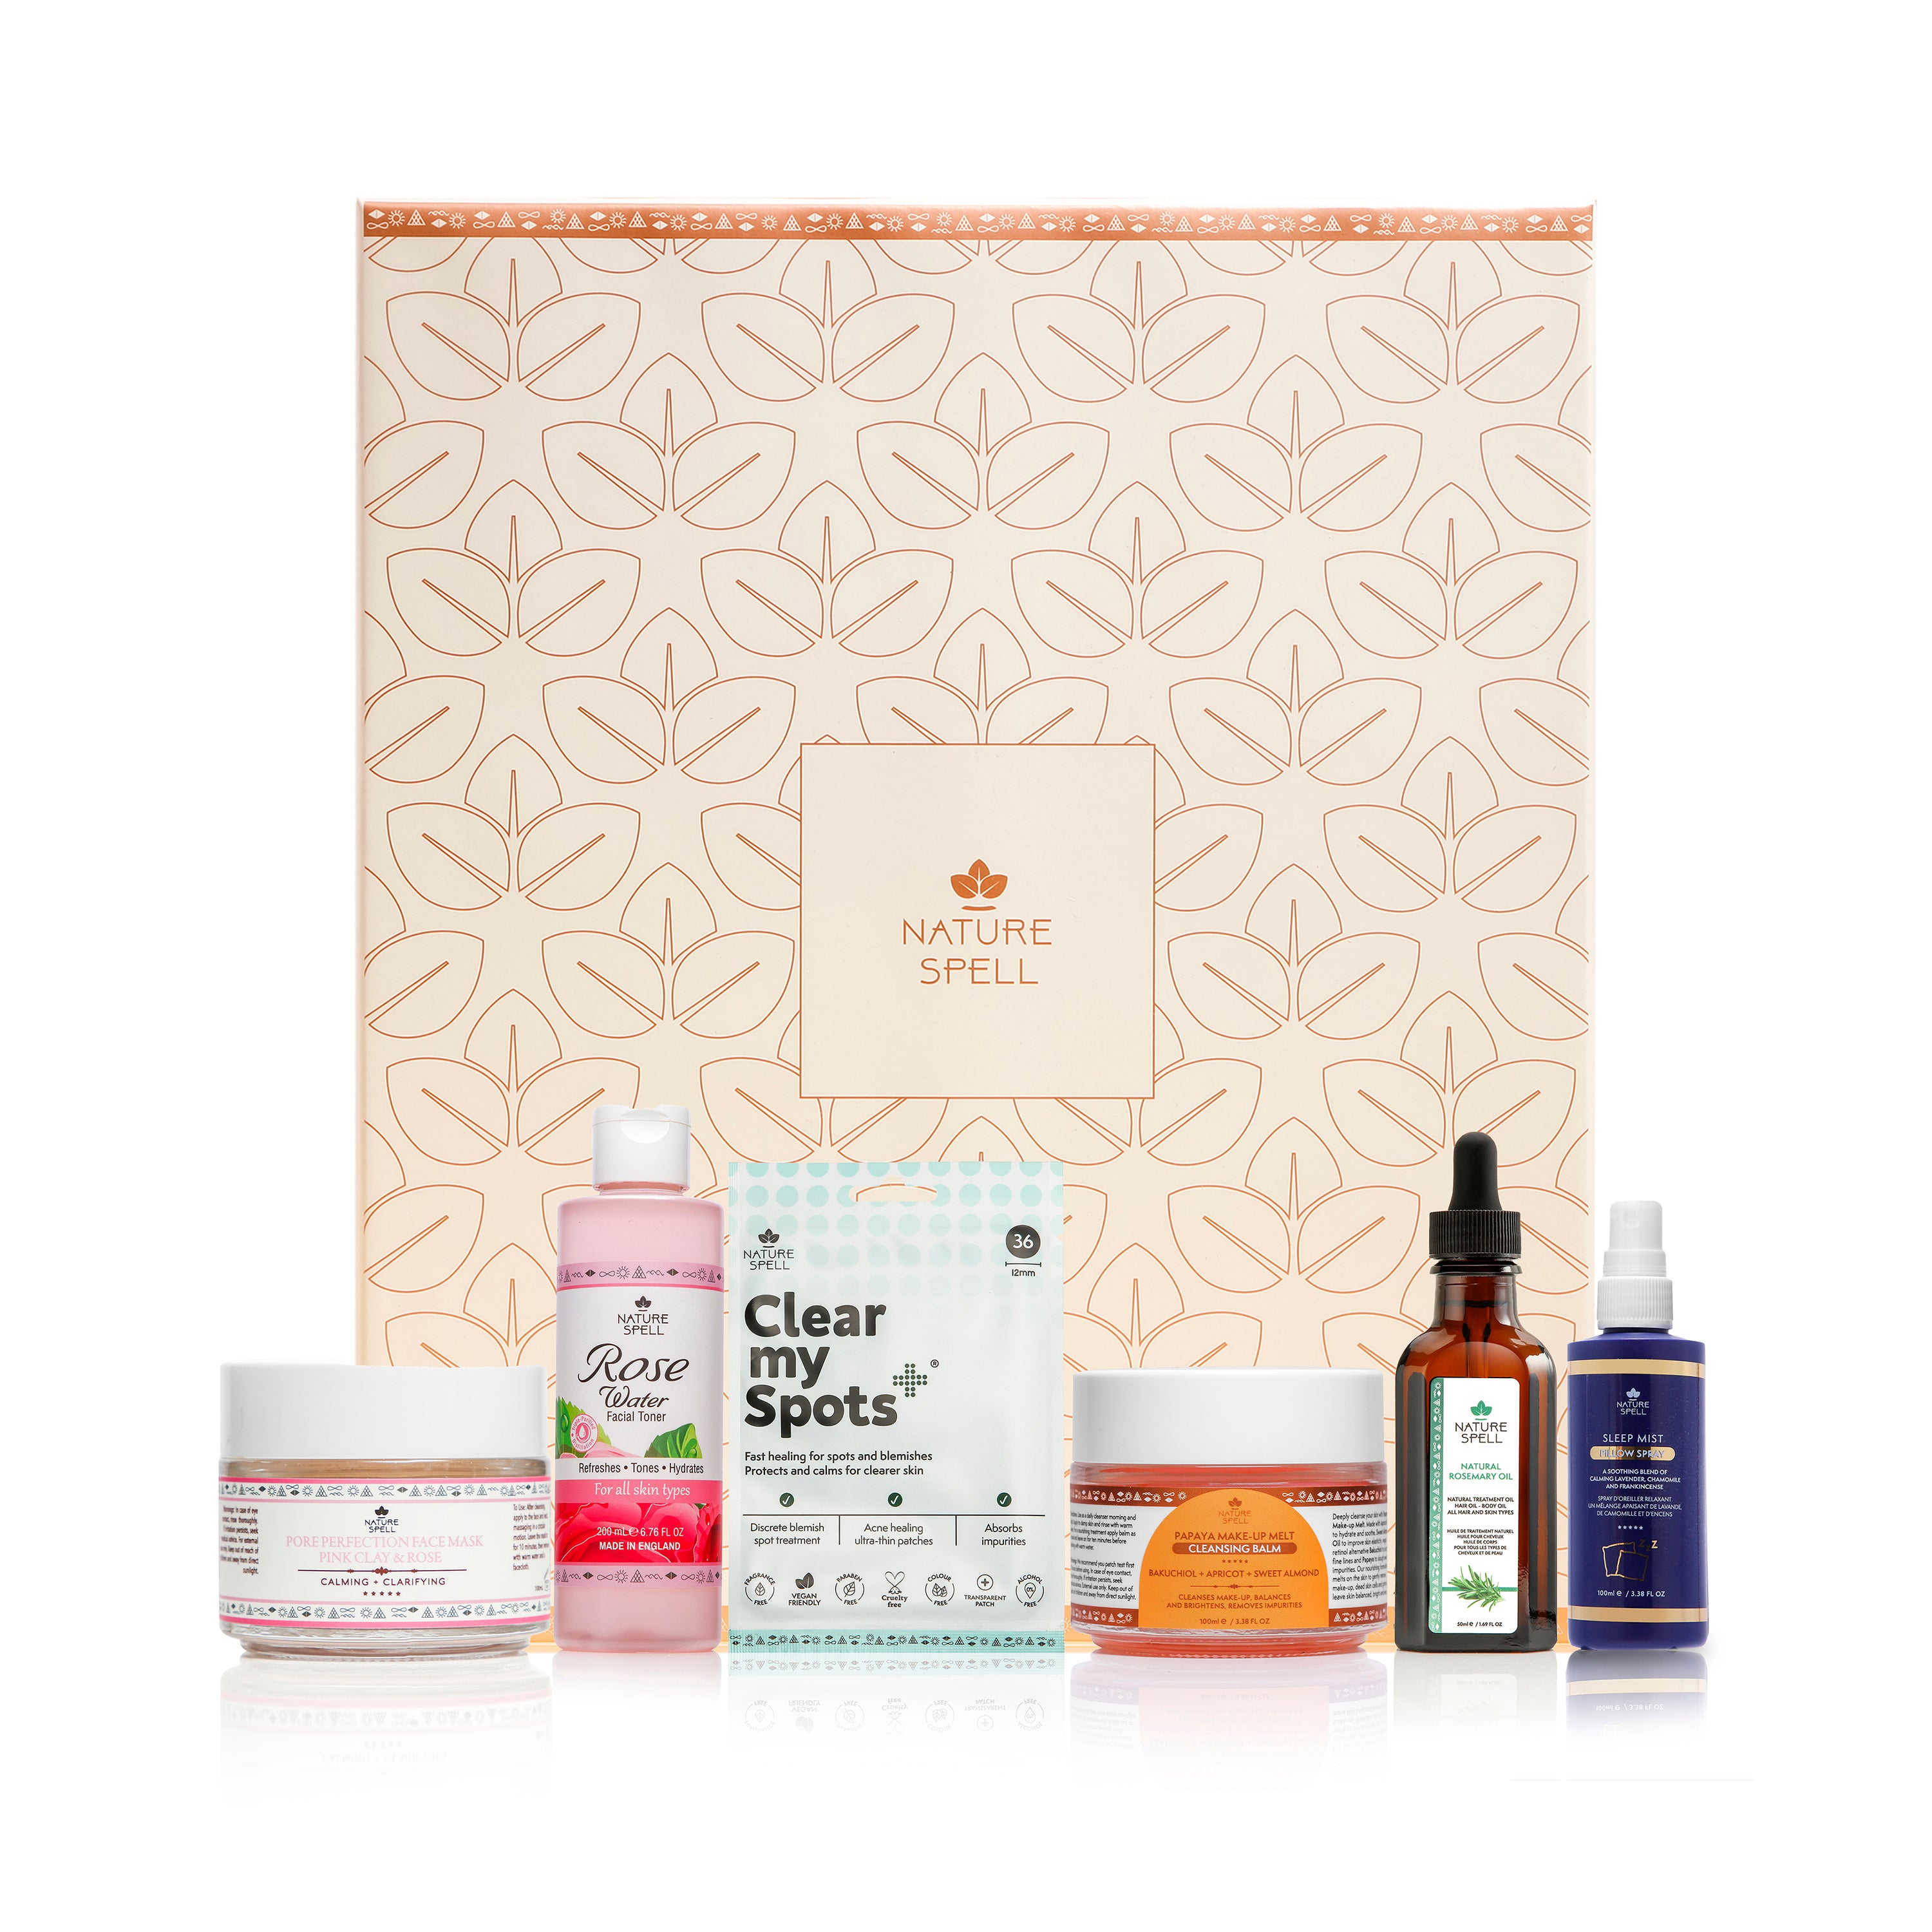 Pamper Season Gift Set - Your at-home selfcare moment